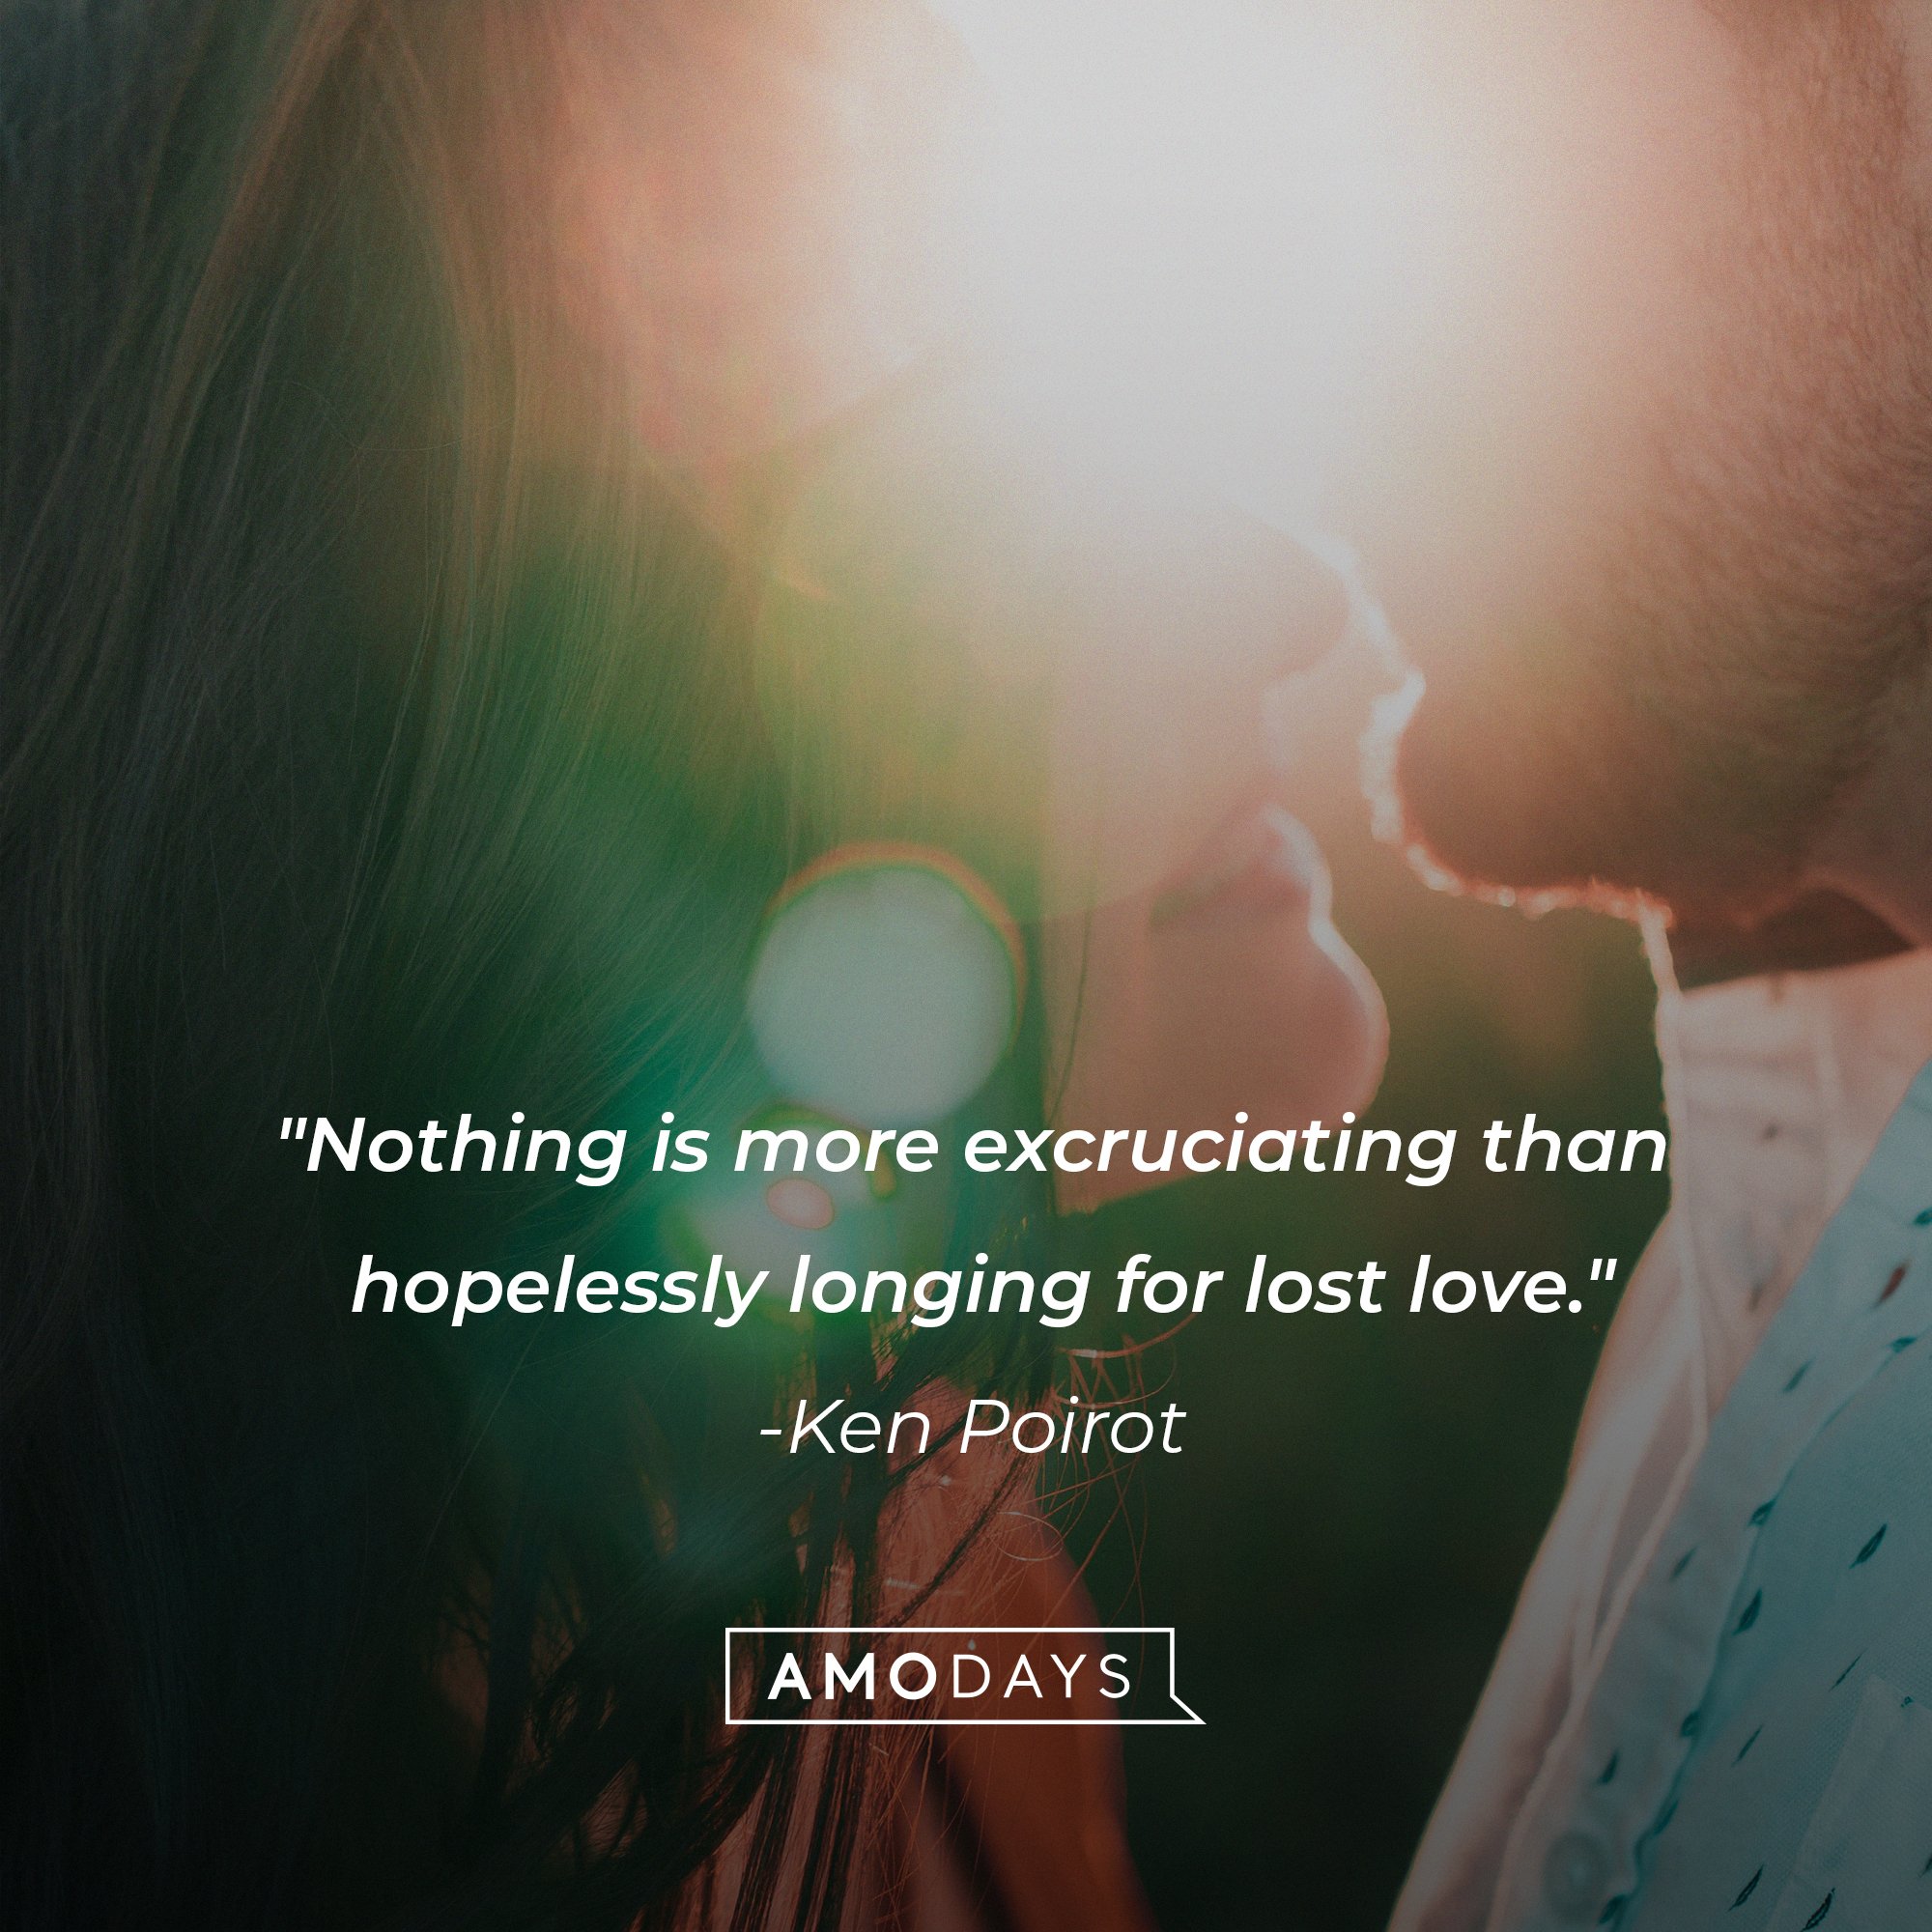 Ken Poirot’s quote: "Nothing is more excruciating than hopelessly longing for lost love." | Image: AmoDays